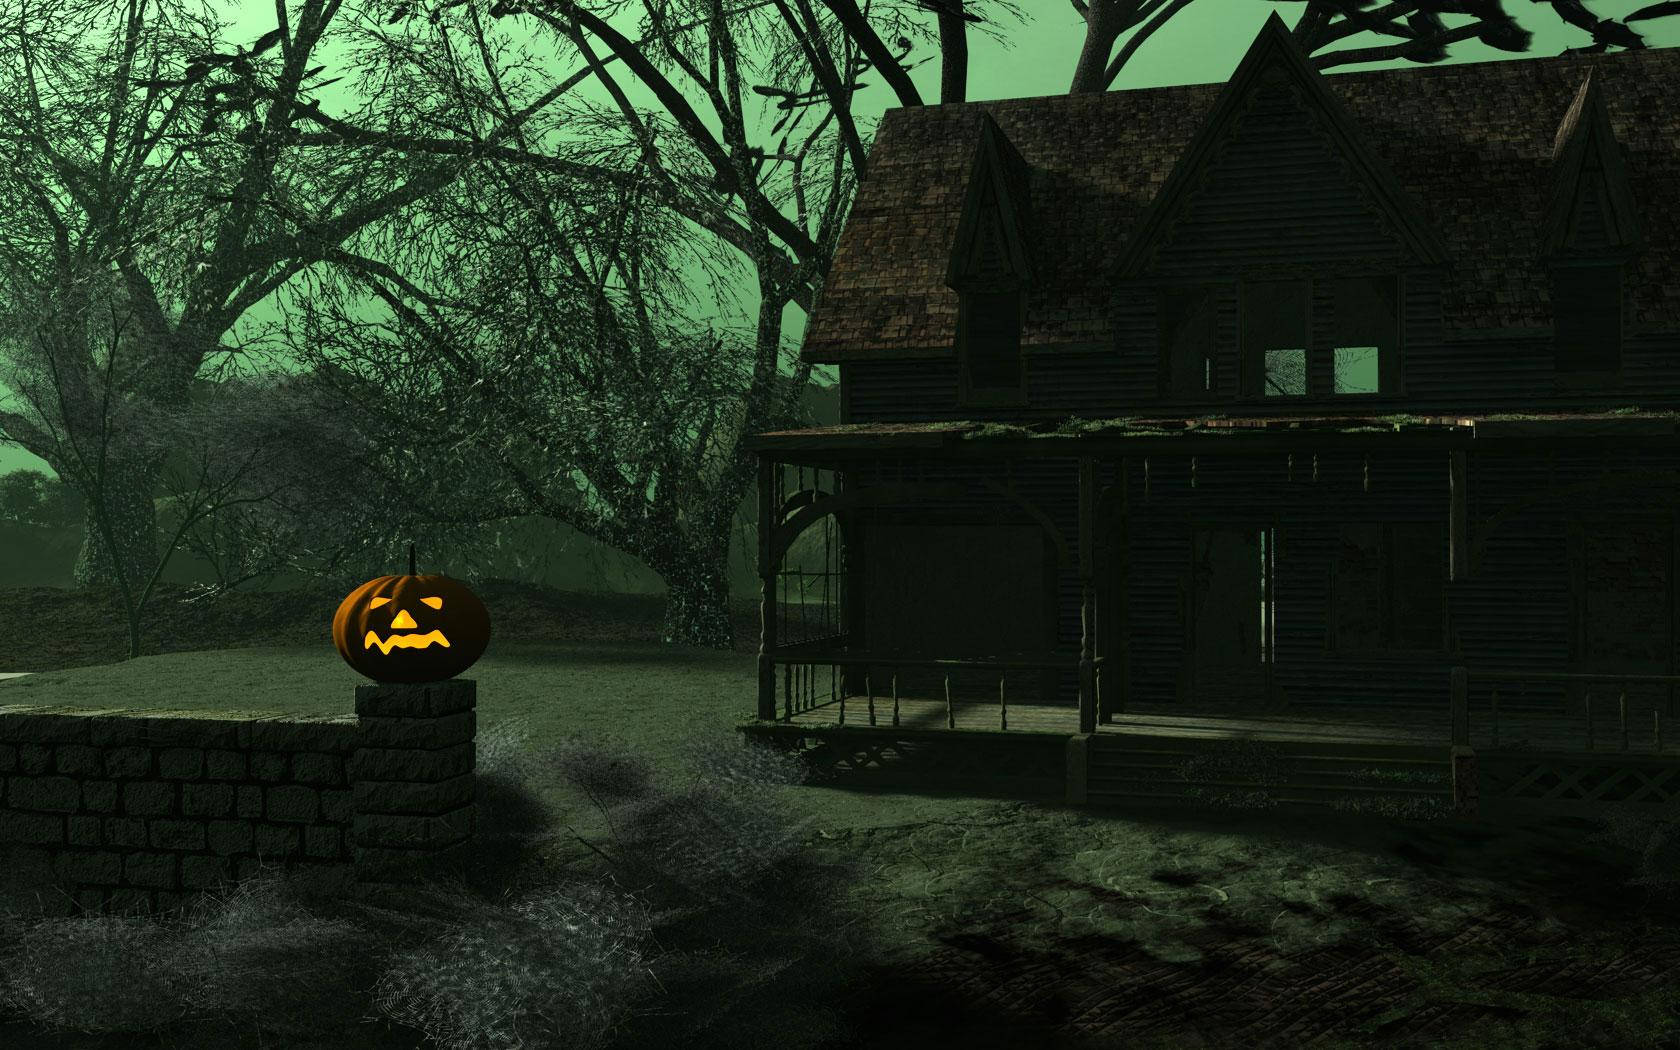 "Trick or Treat - Don't get tricked by the spooky sight of this Haunted House on Halloween!" Wallpaper